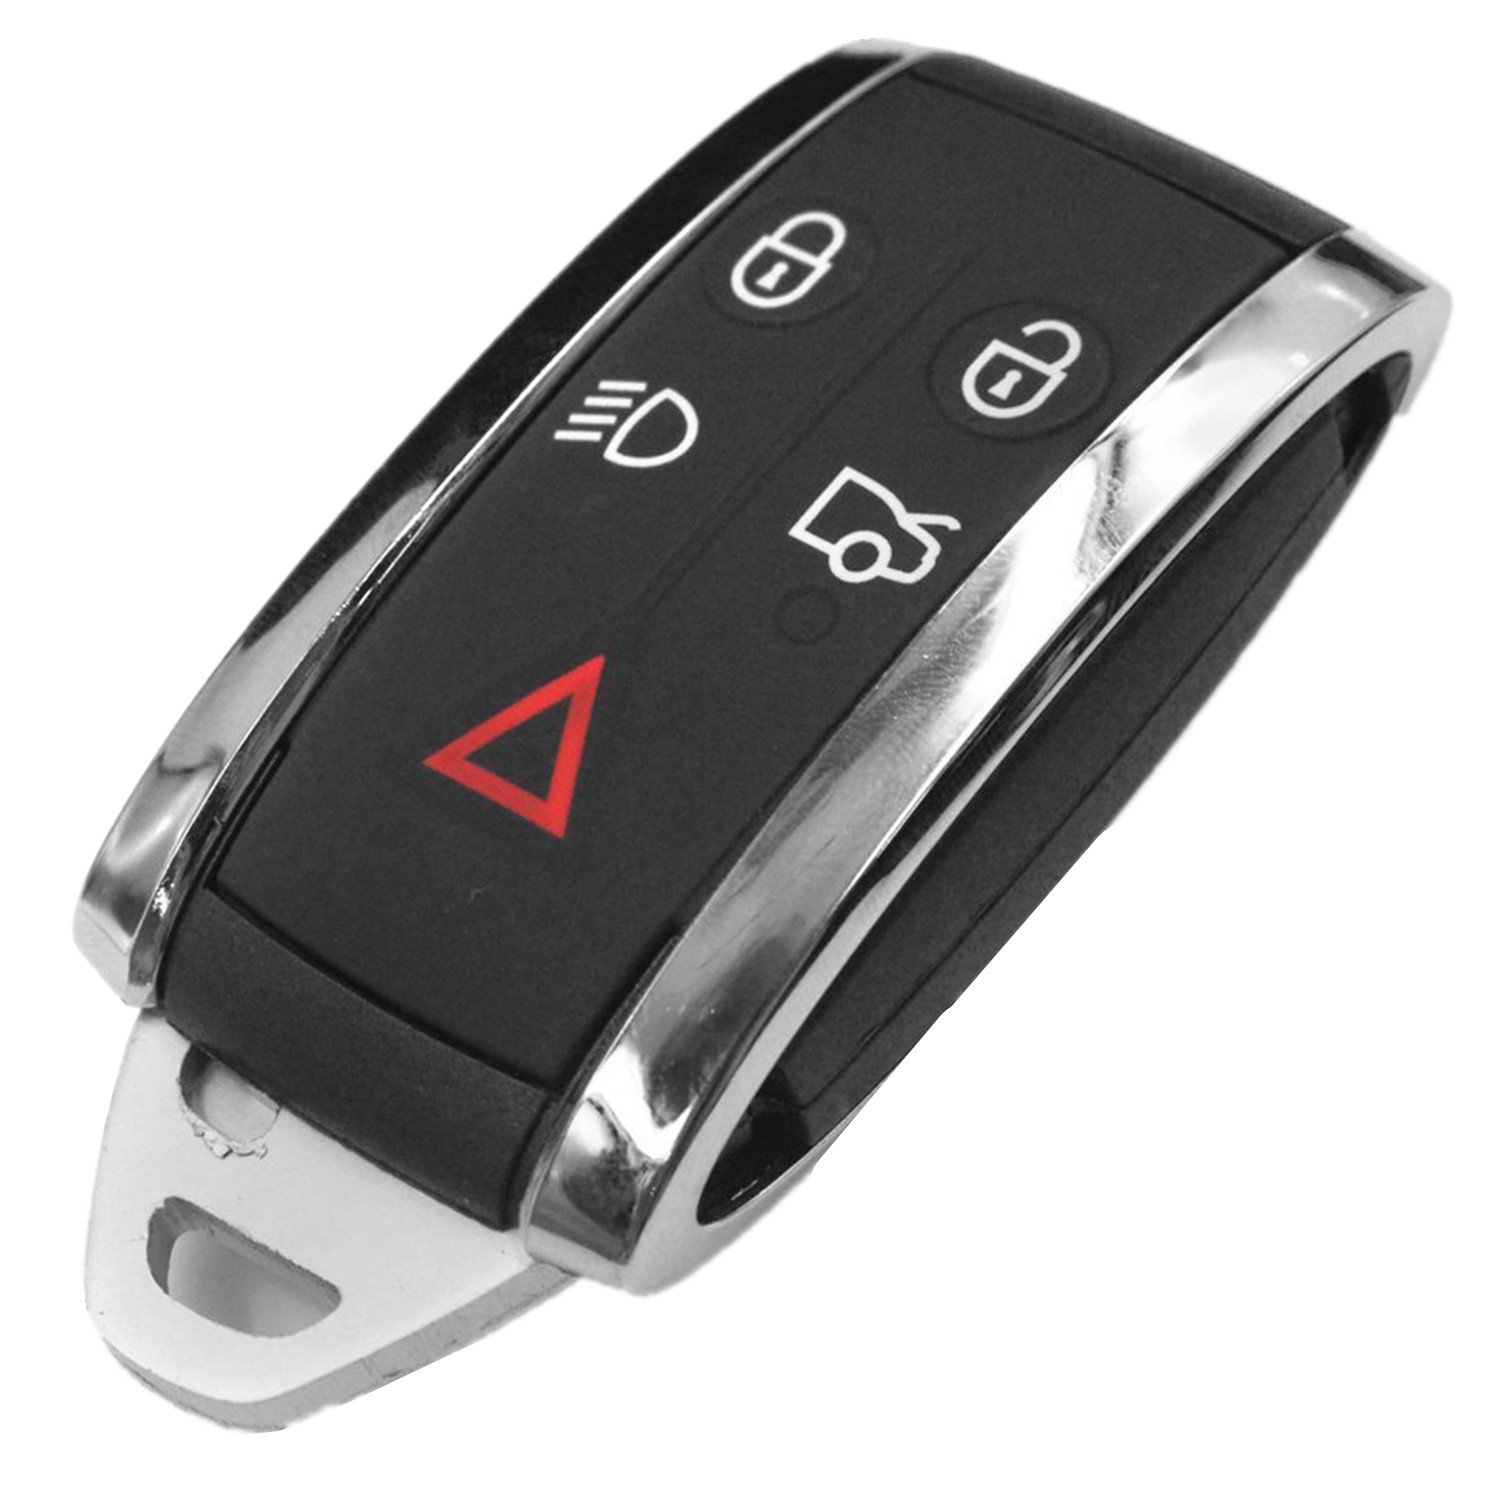 Do car key manufacturers offer keyless entry systems?